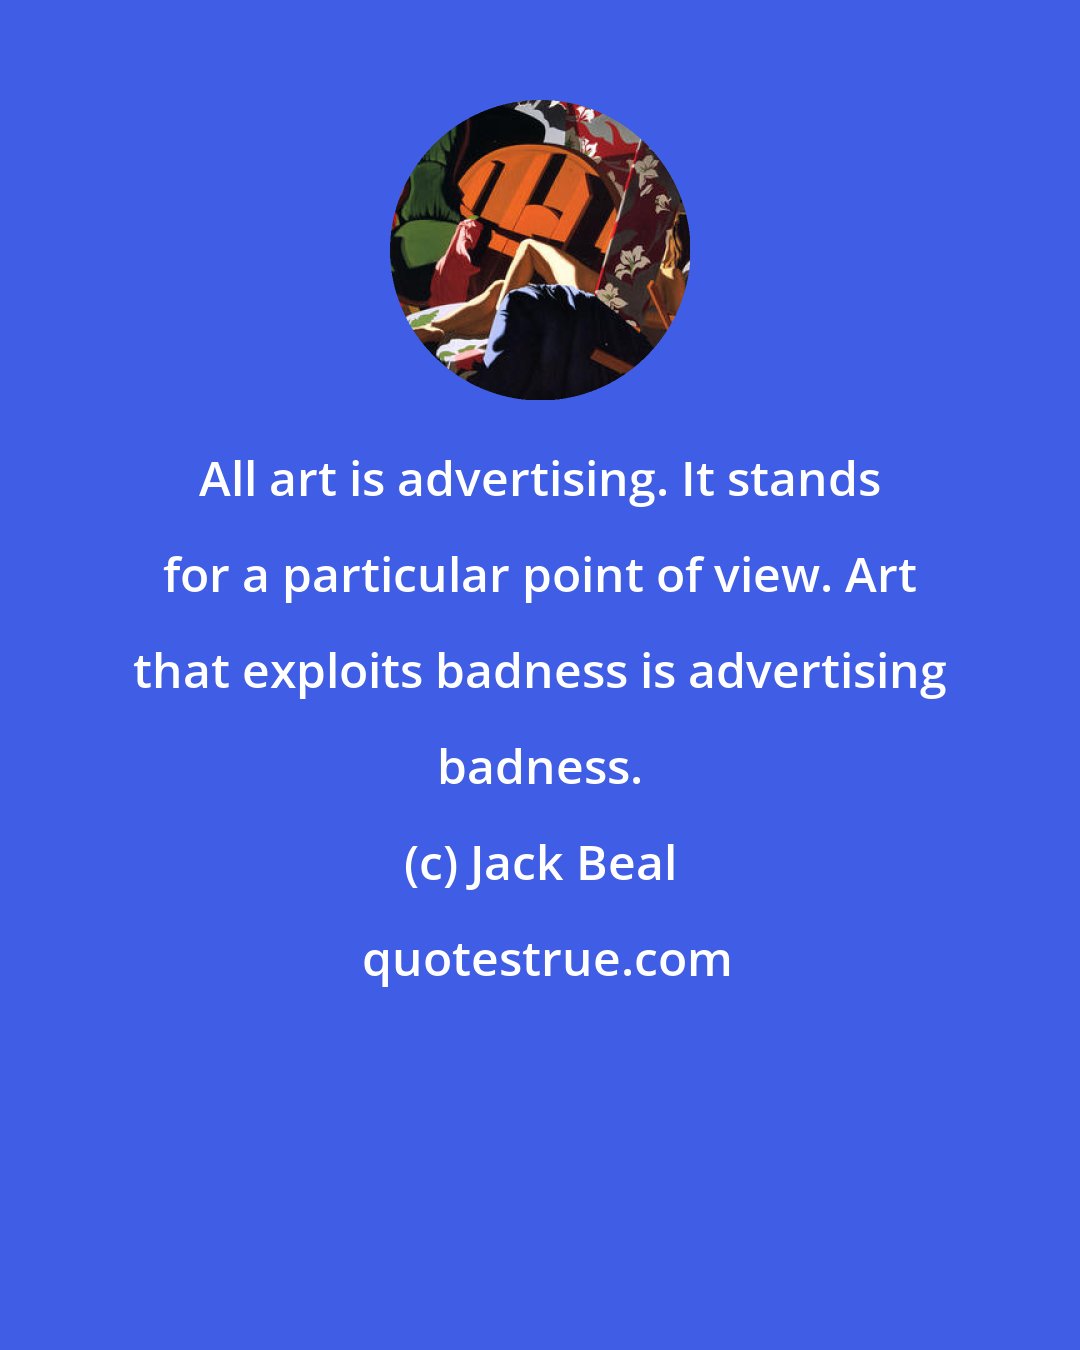 Jack Beal: All art is advertising. It stands for a particular point of view. Art that exploits badness is advertising badness.